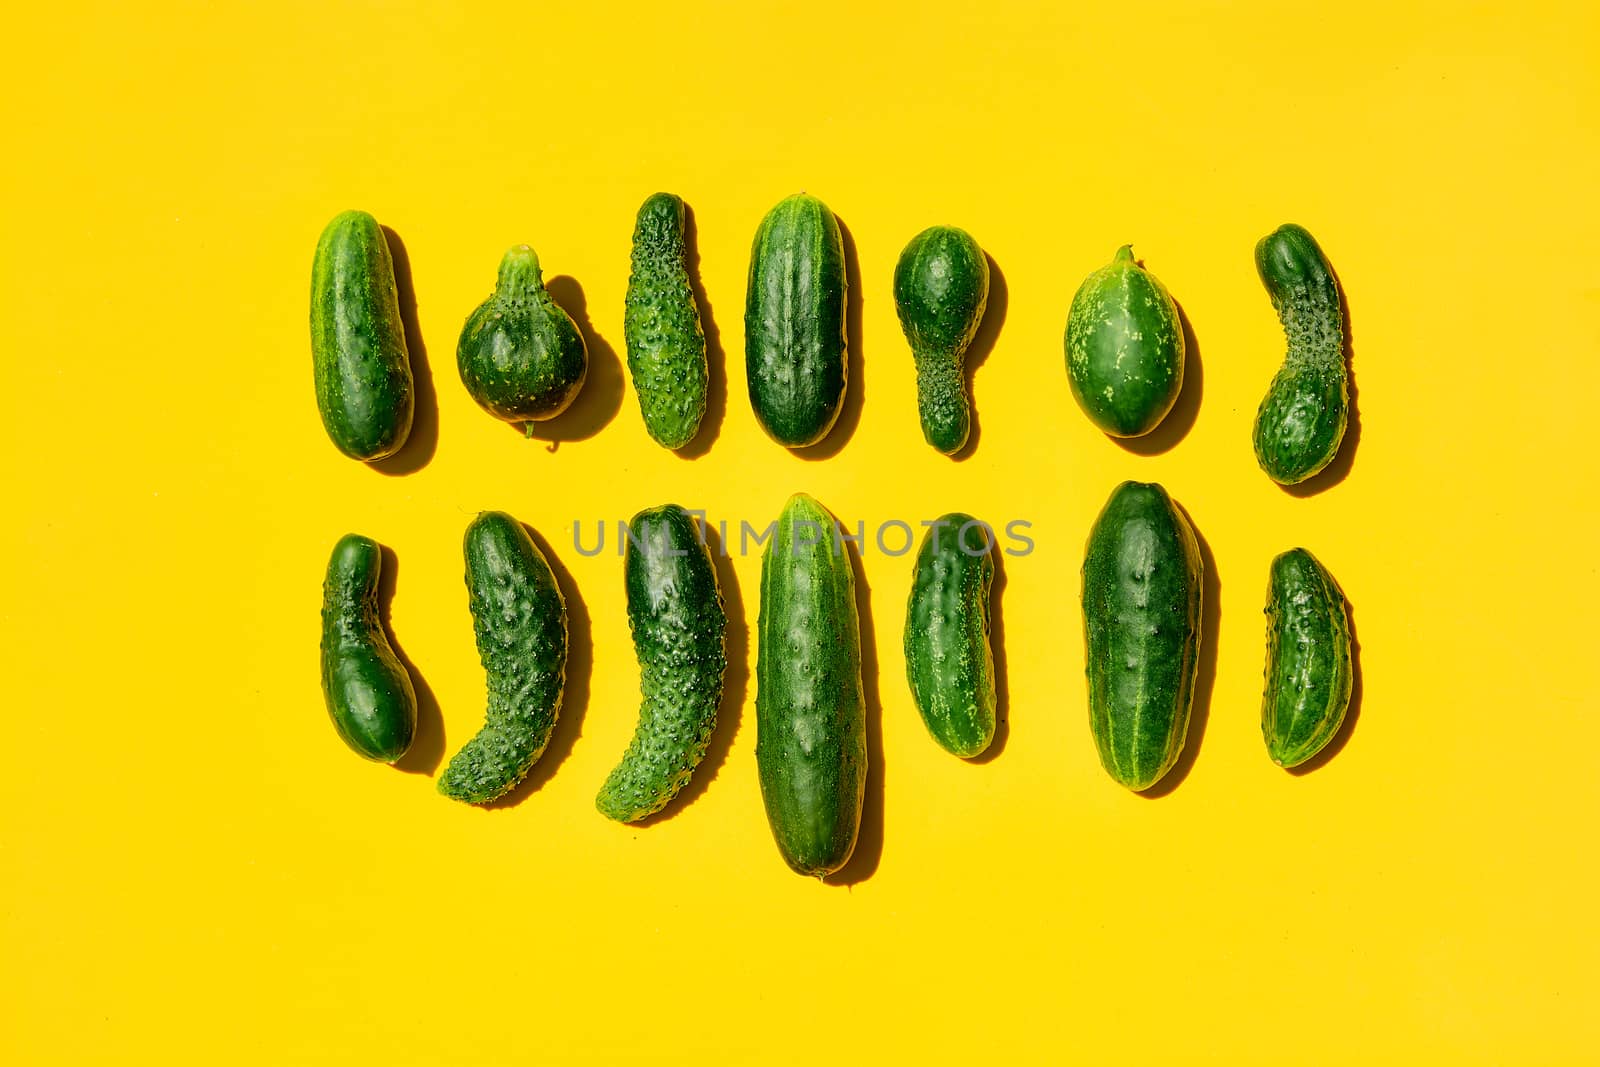 Different sizes forms cucumbers pattern on a light yellow background. Copy space. Cucumbers background close-up. Top view. Cucumber harvest. Cucumbers texture wallpaper. Farming, harvesting concept.